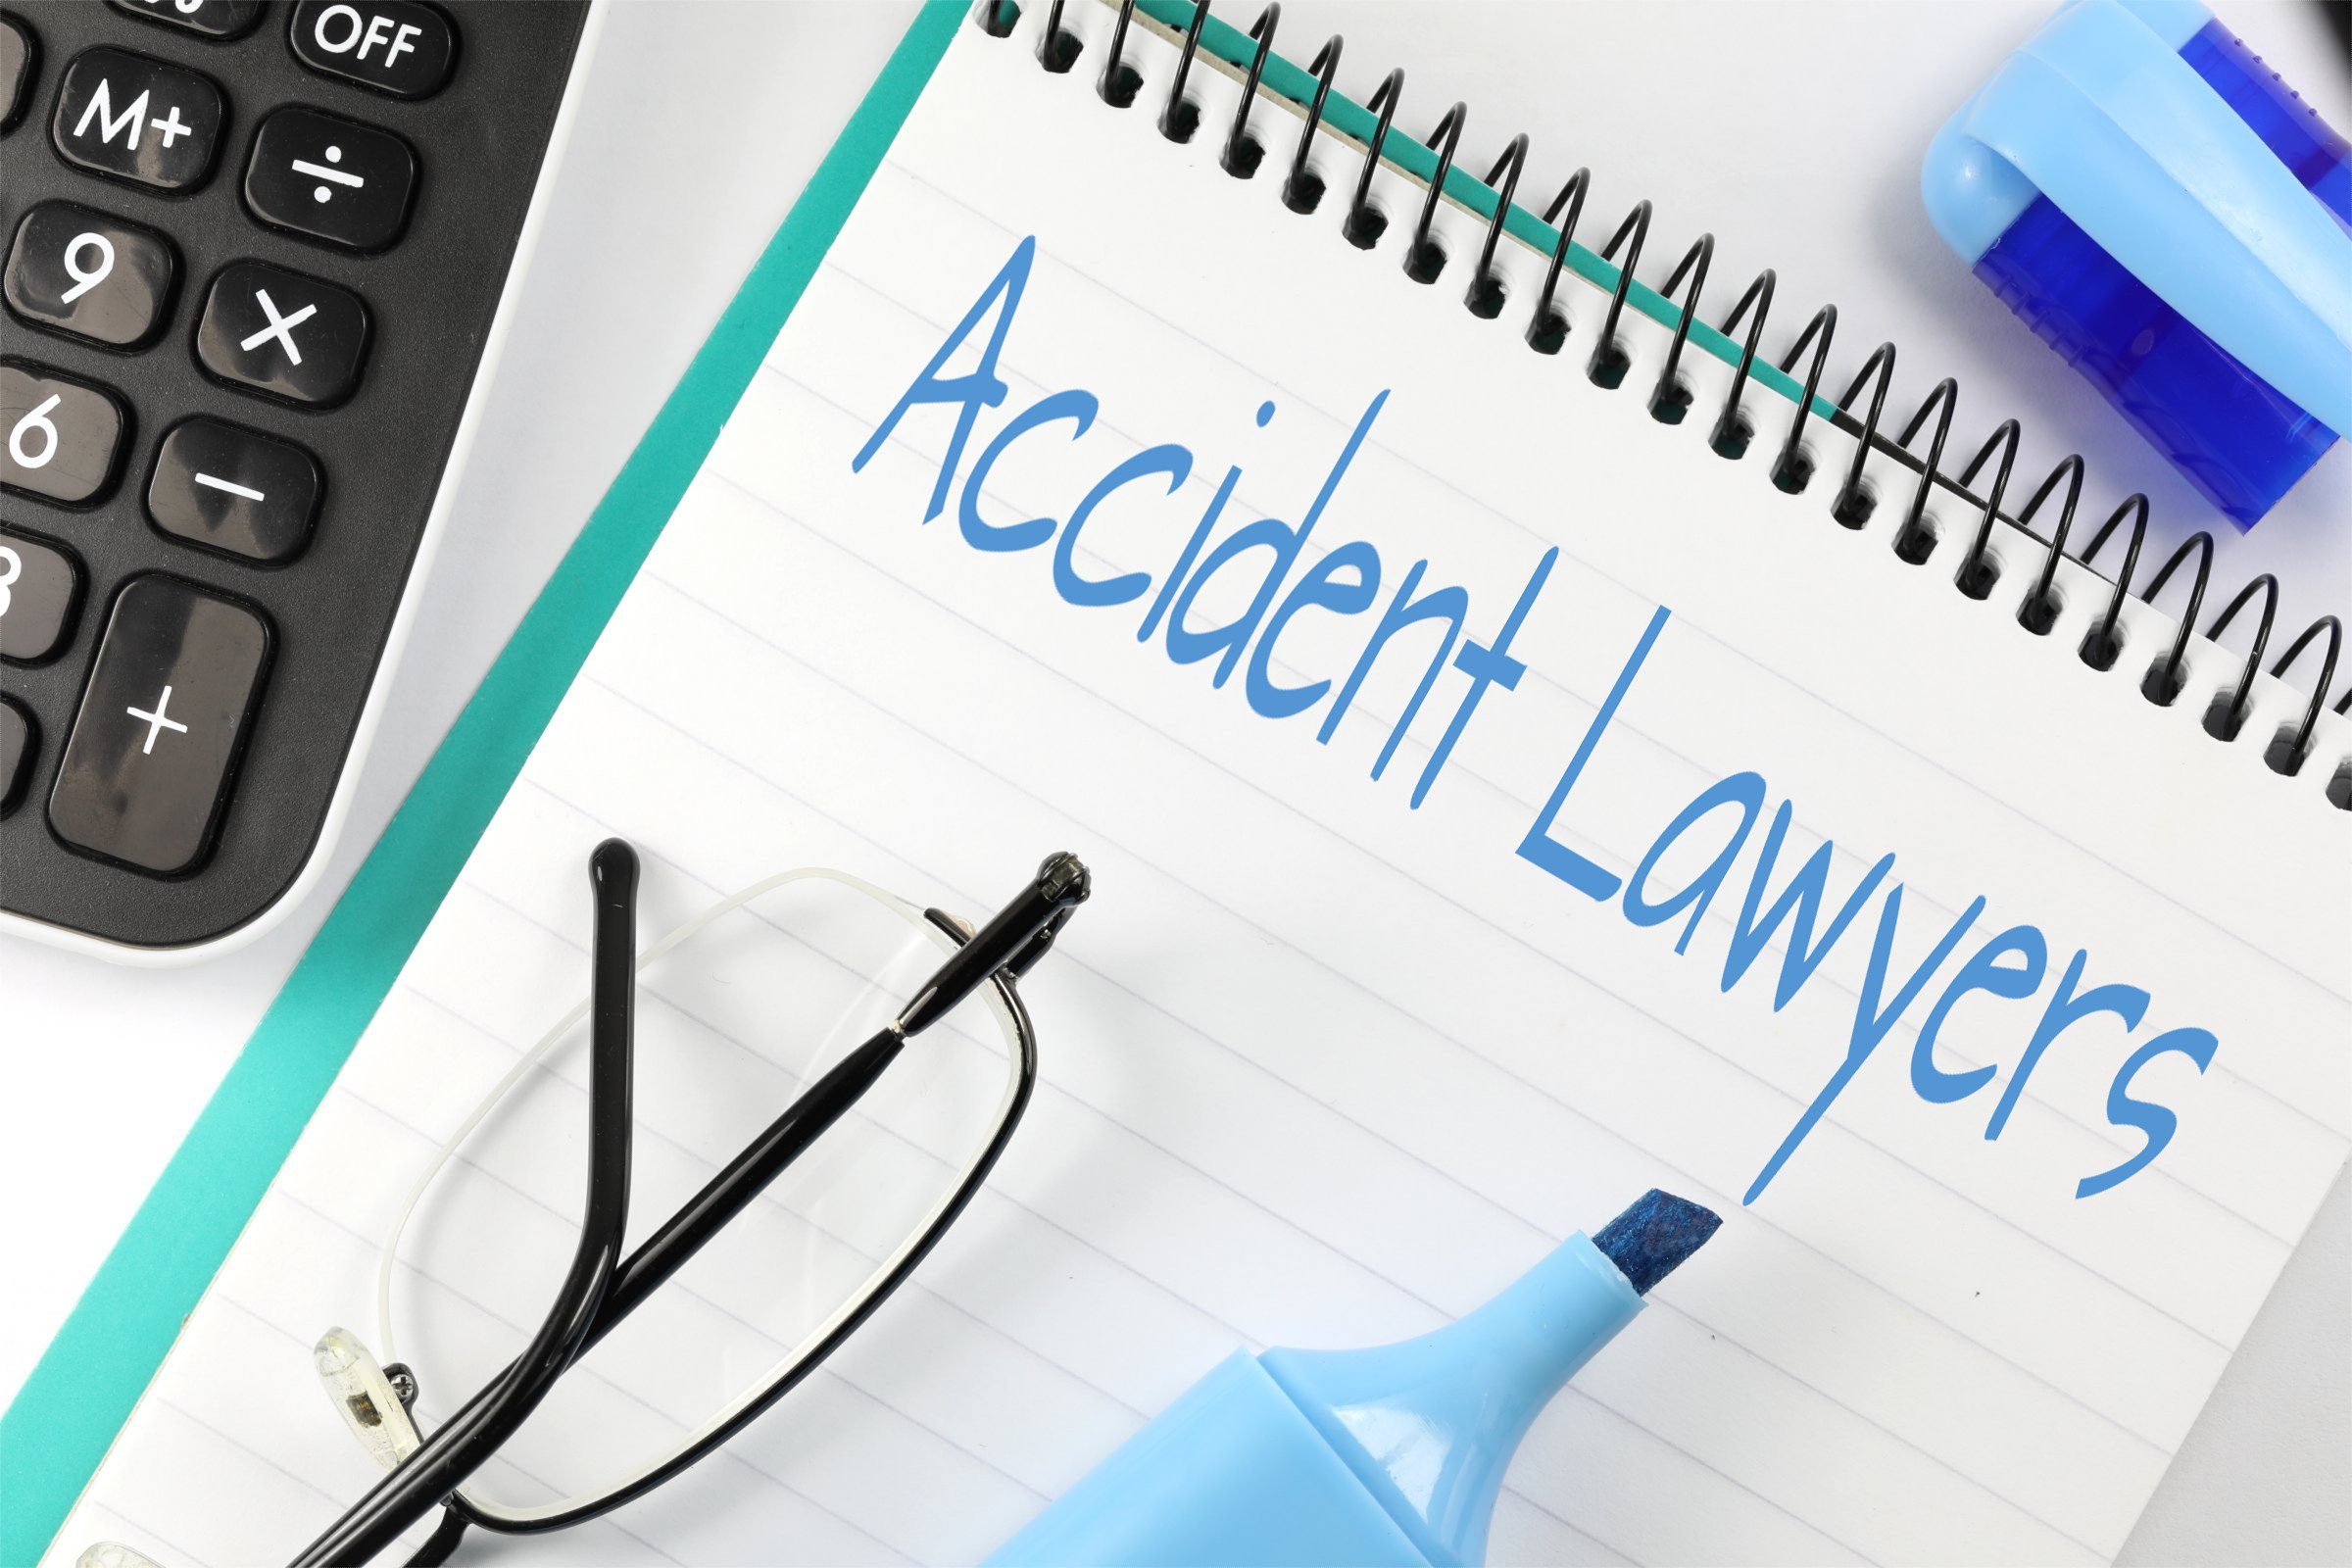 accident lawyers